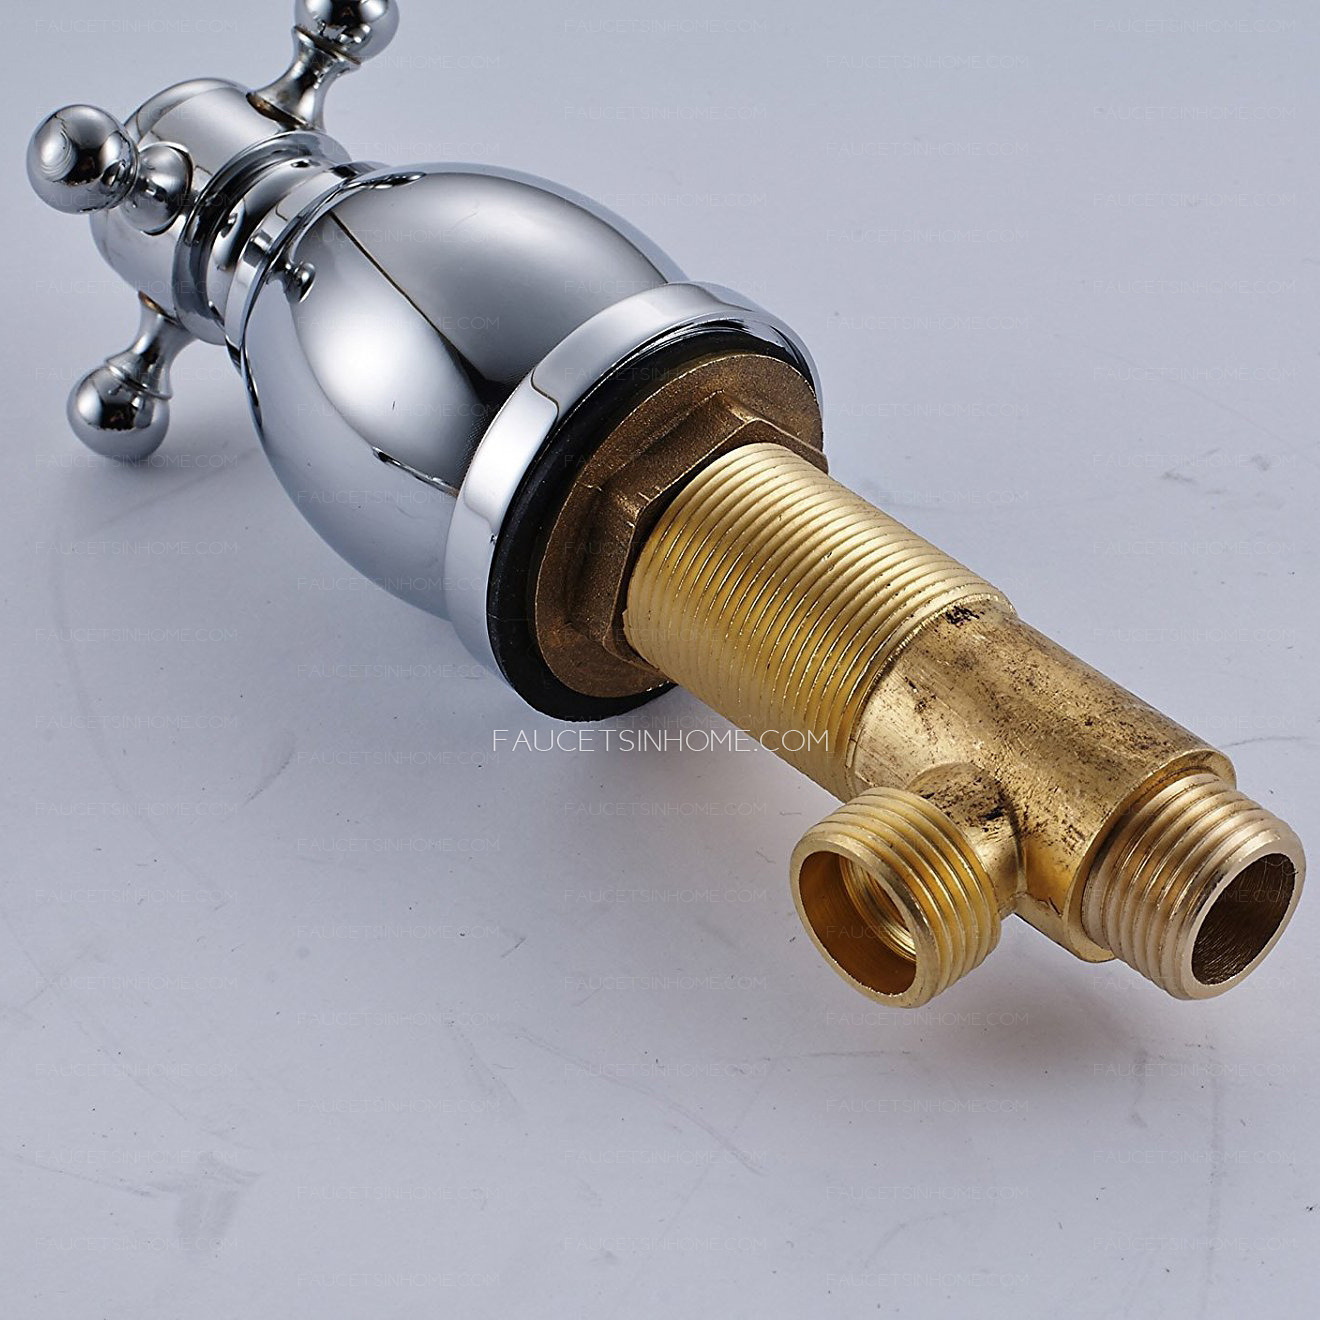 Antique Brass Brushed Gold Waterfall Single Lever Bathroom Faucet